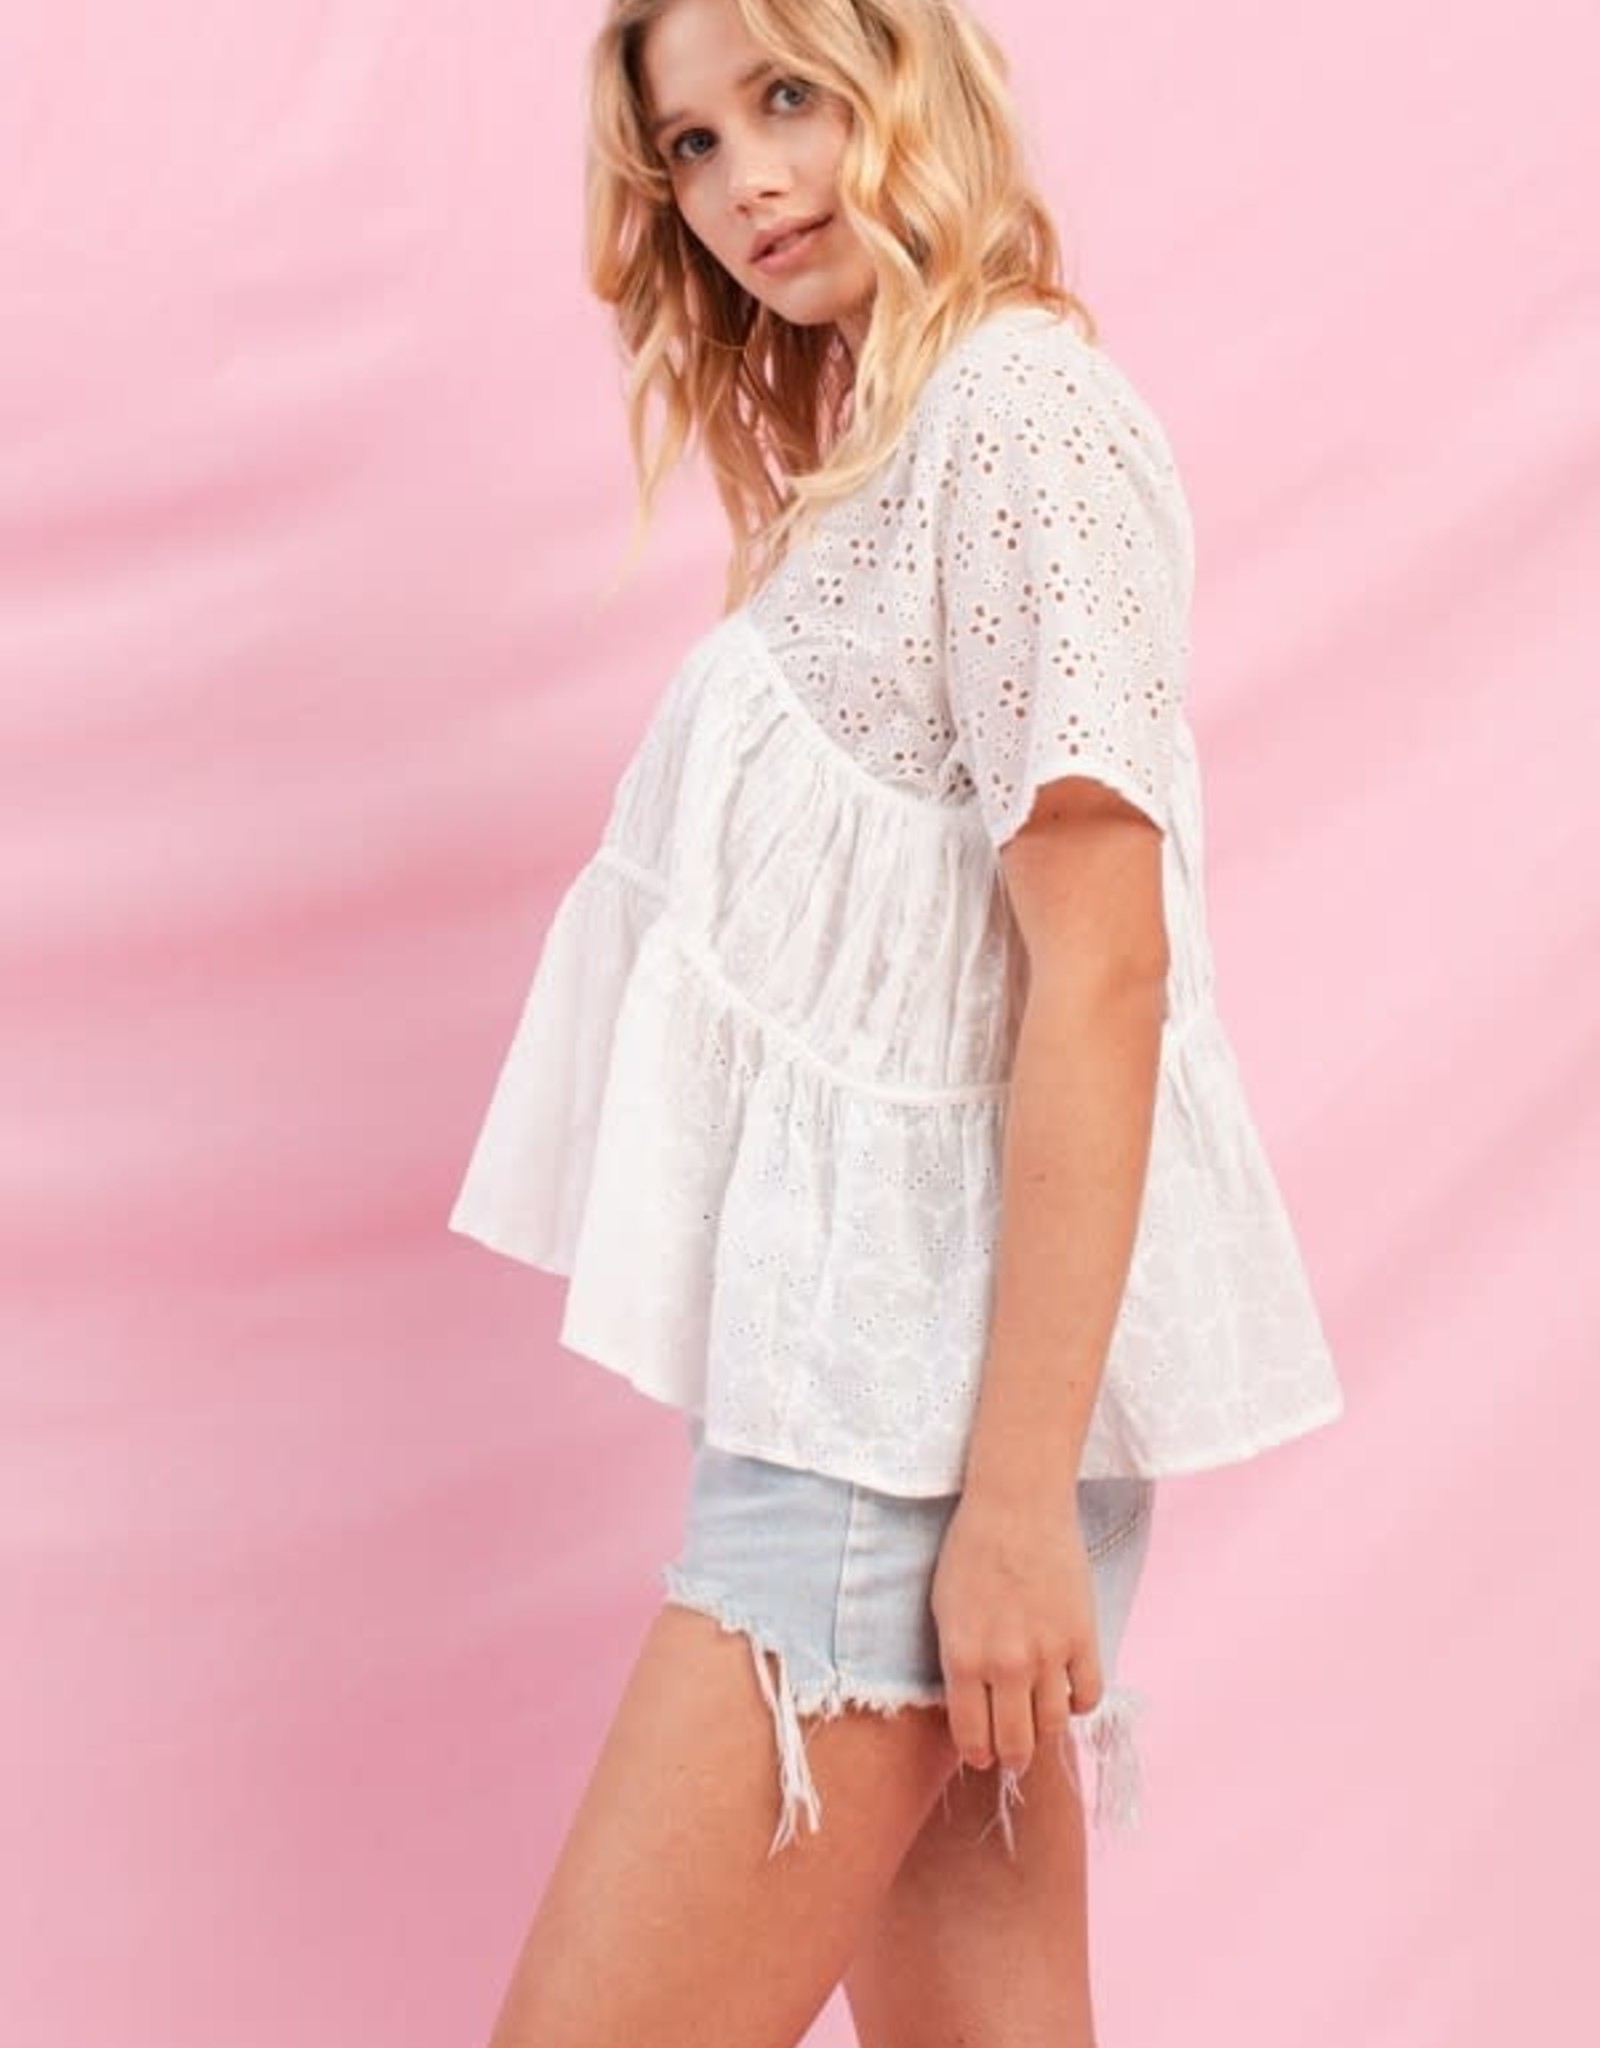 Oddi Tiered Eyelet Lace Blouse Cuffed Short Sleeves V-Neckline Button Key Hole Cut Out at the Back